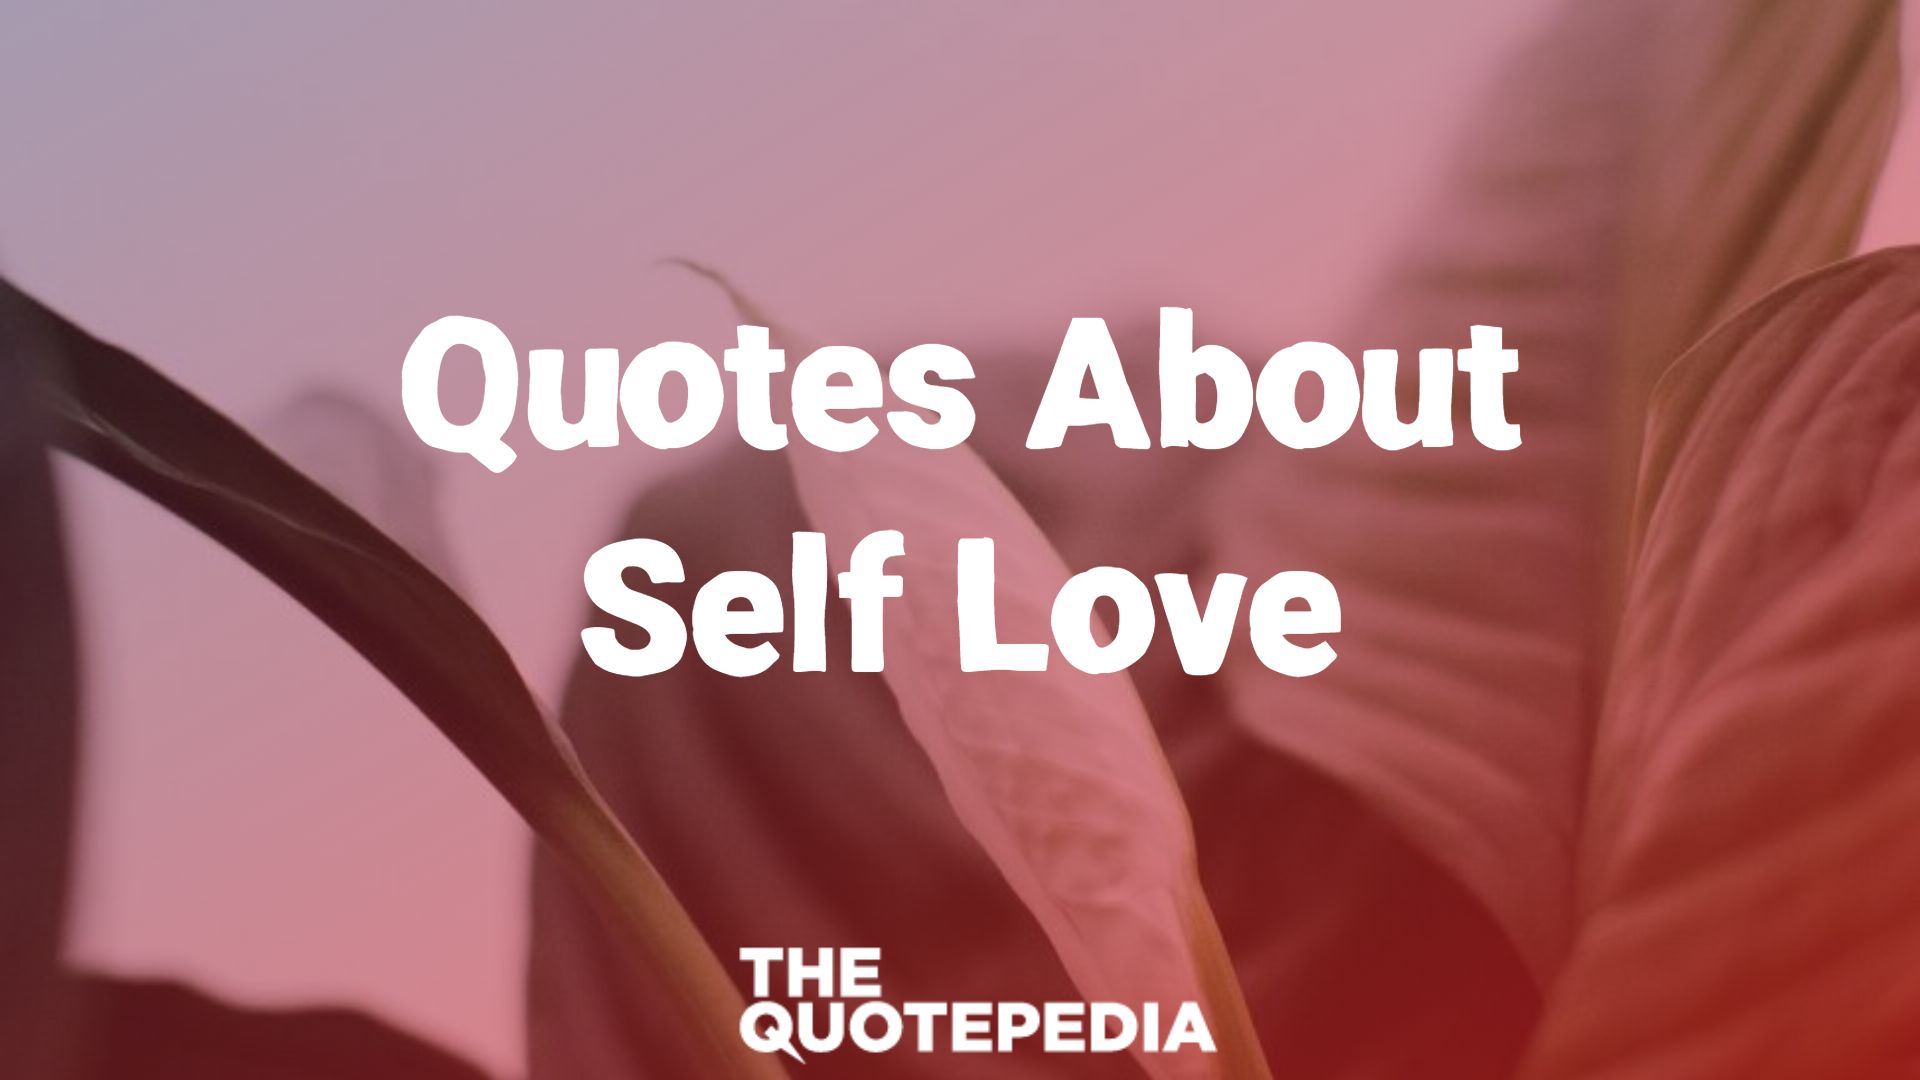 Quotes About Self Love